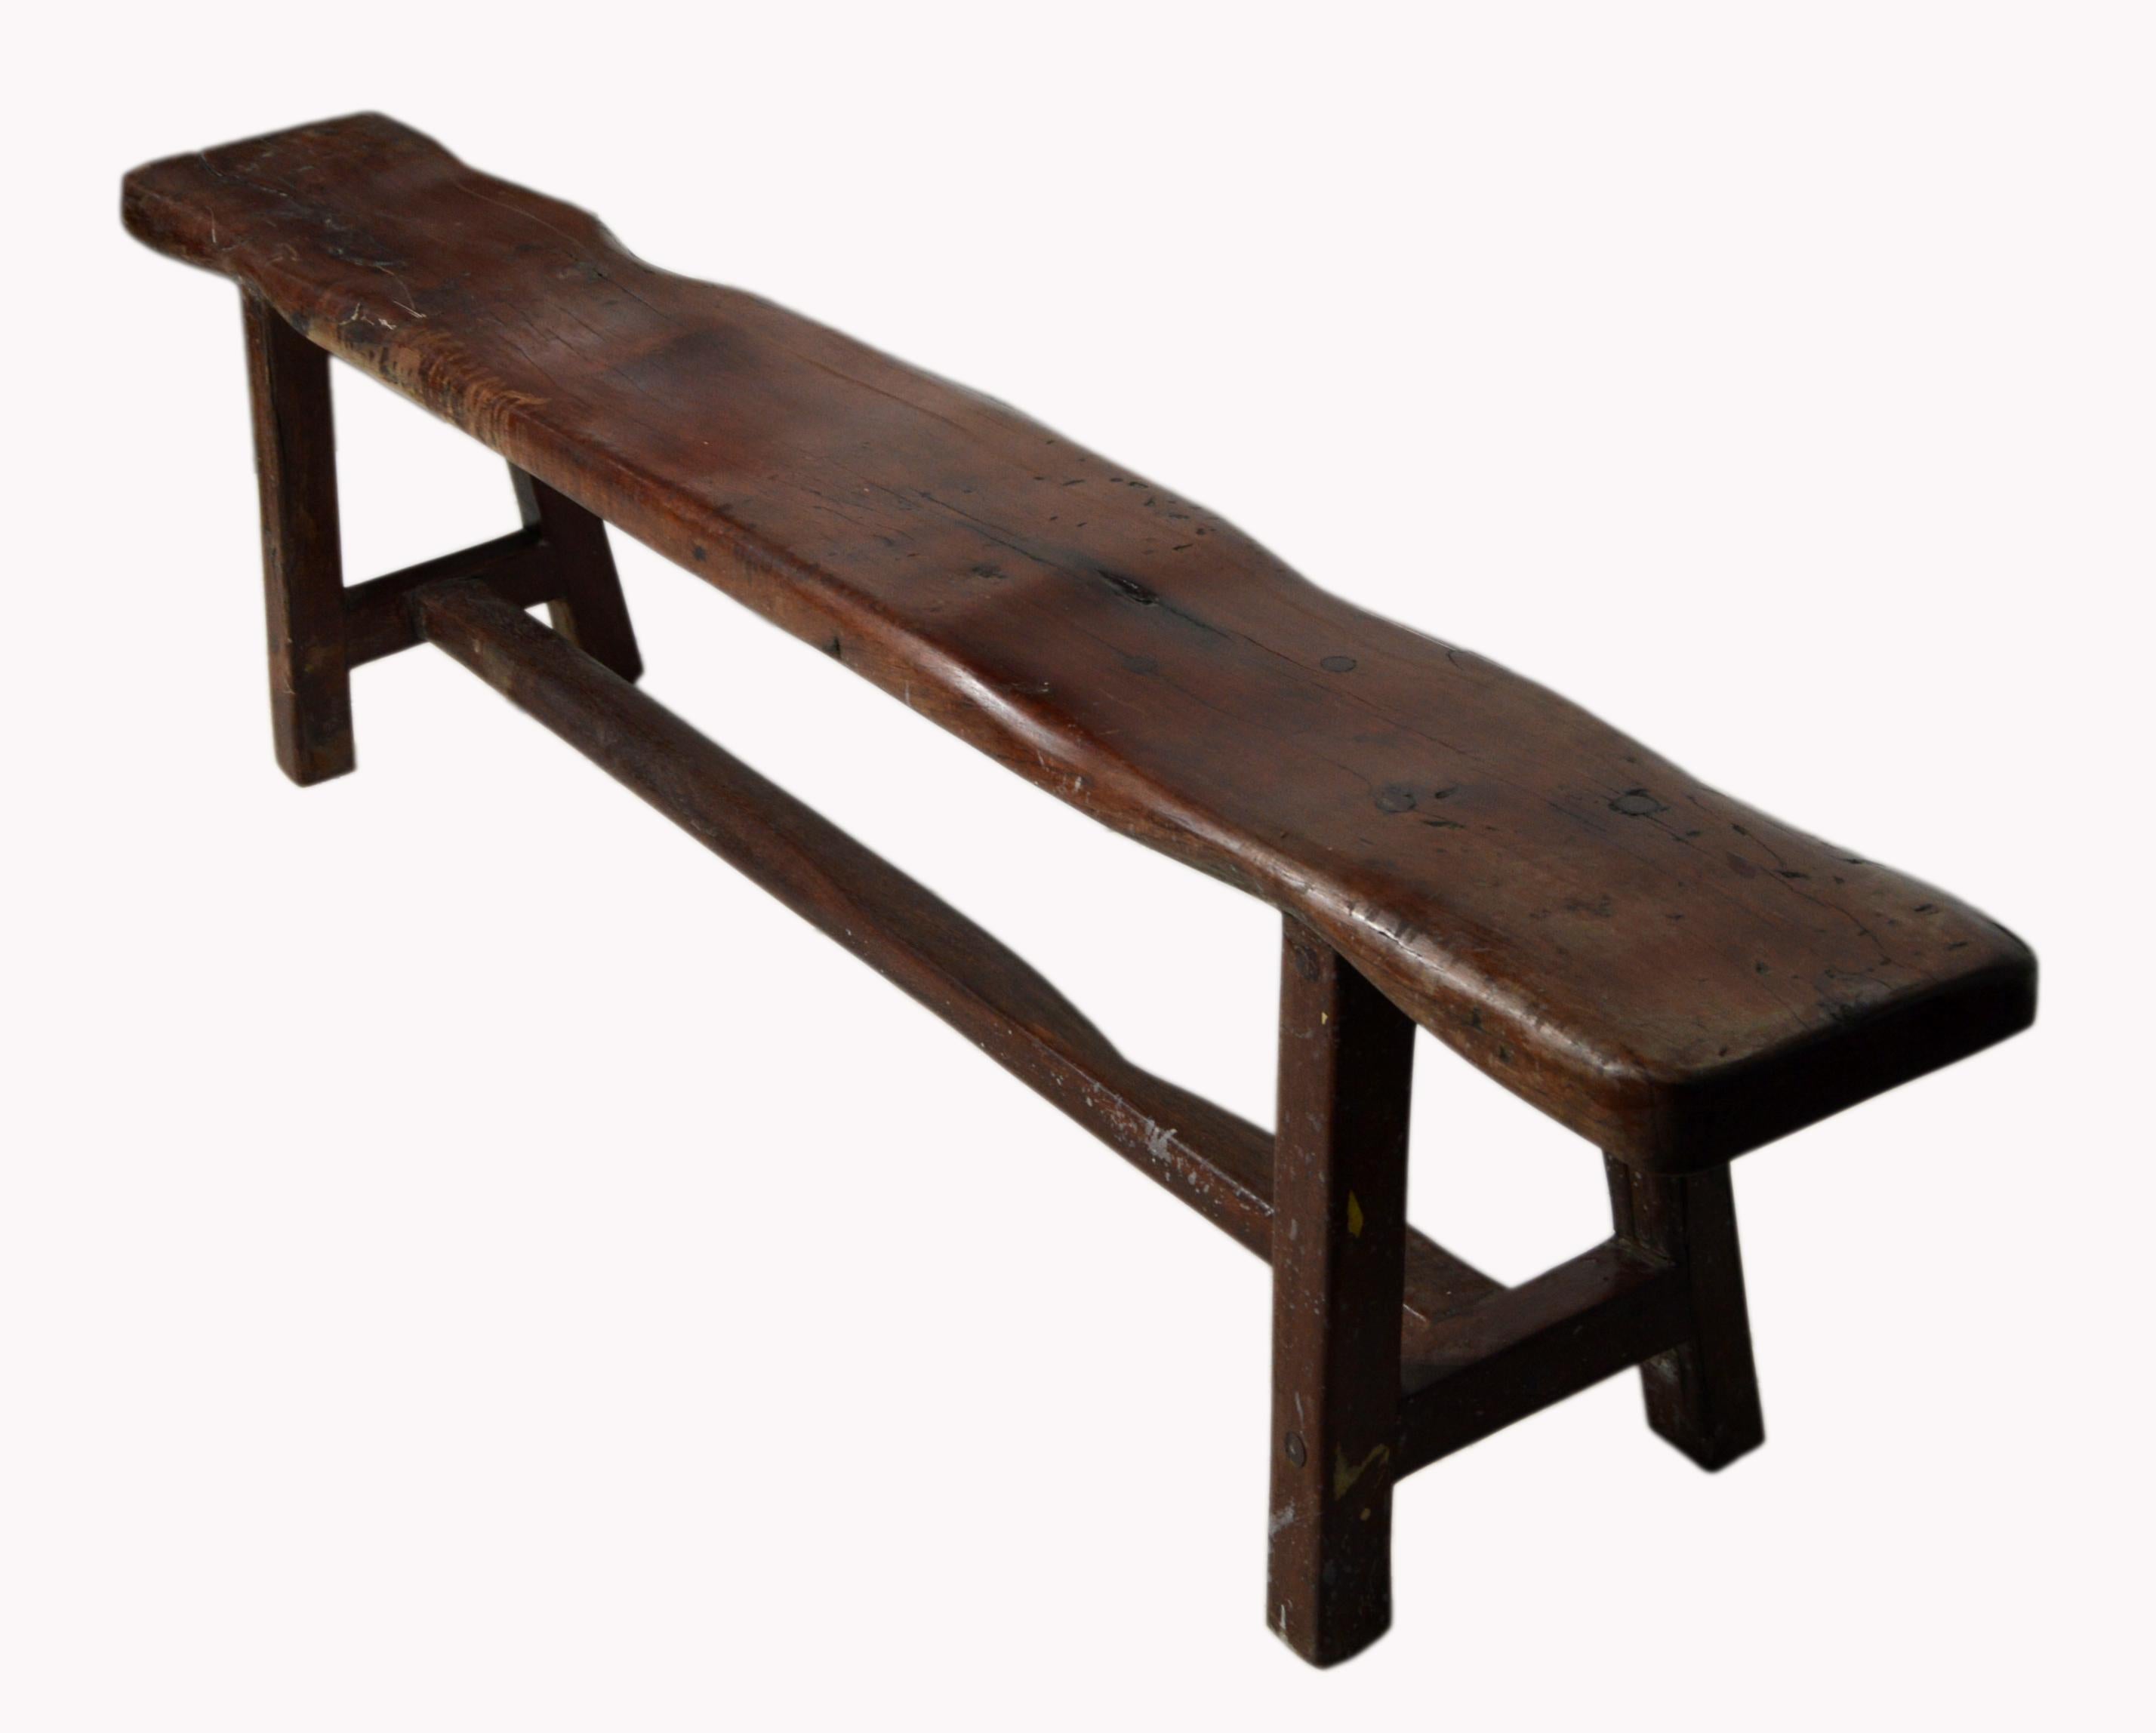 A handmade vintage Javanese long rustic wooden bench with brown finish. Born in the Indonesian island of Java during the mid 20th century, this narrow bench features a charming long and tick rectangular seat resting on four slightly splayed legs,